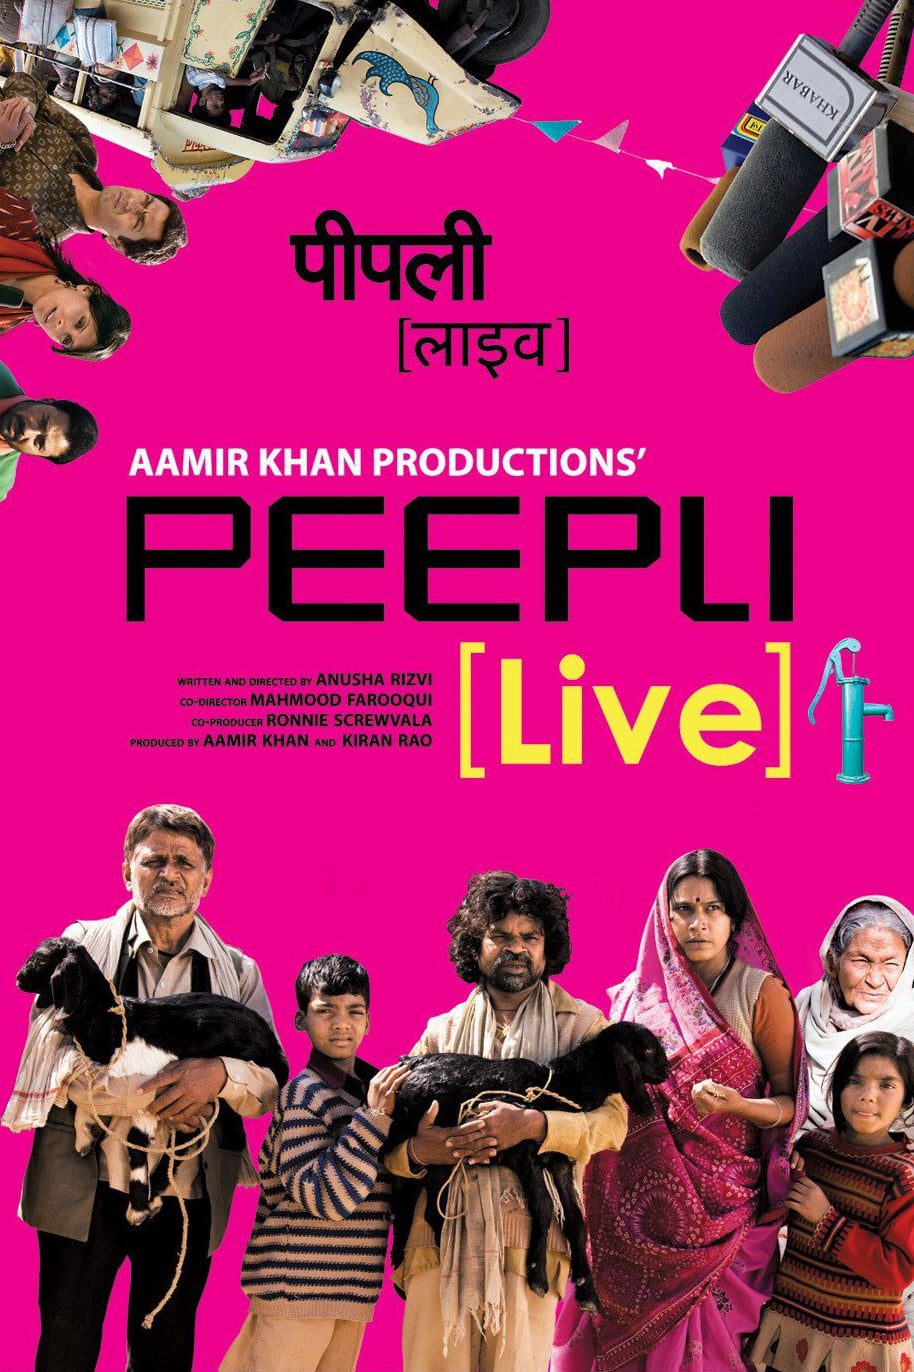 Poster for the movie "Peepli Live"